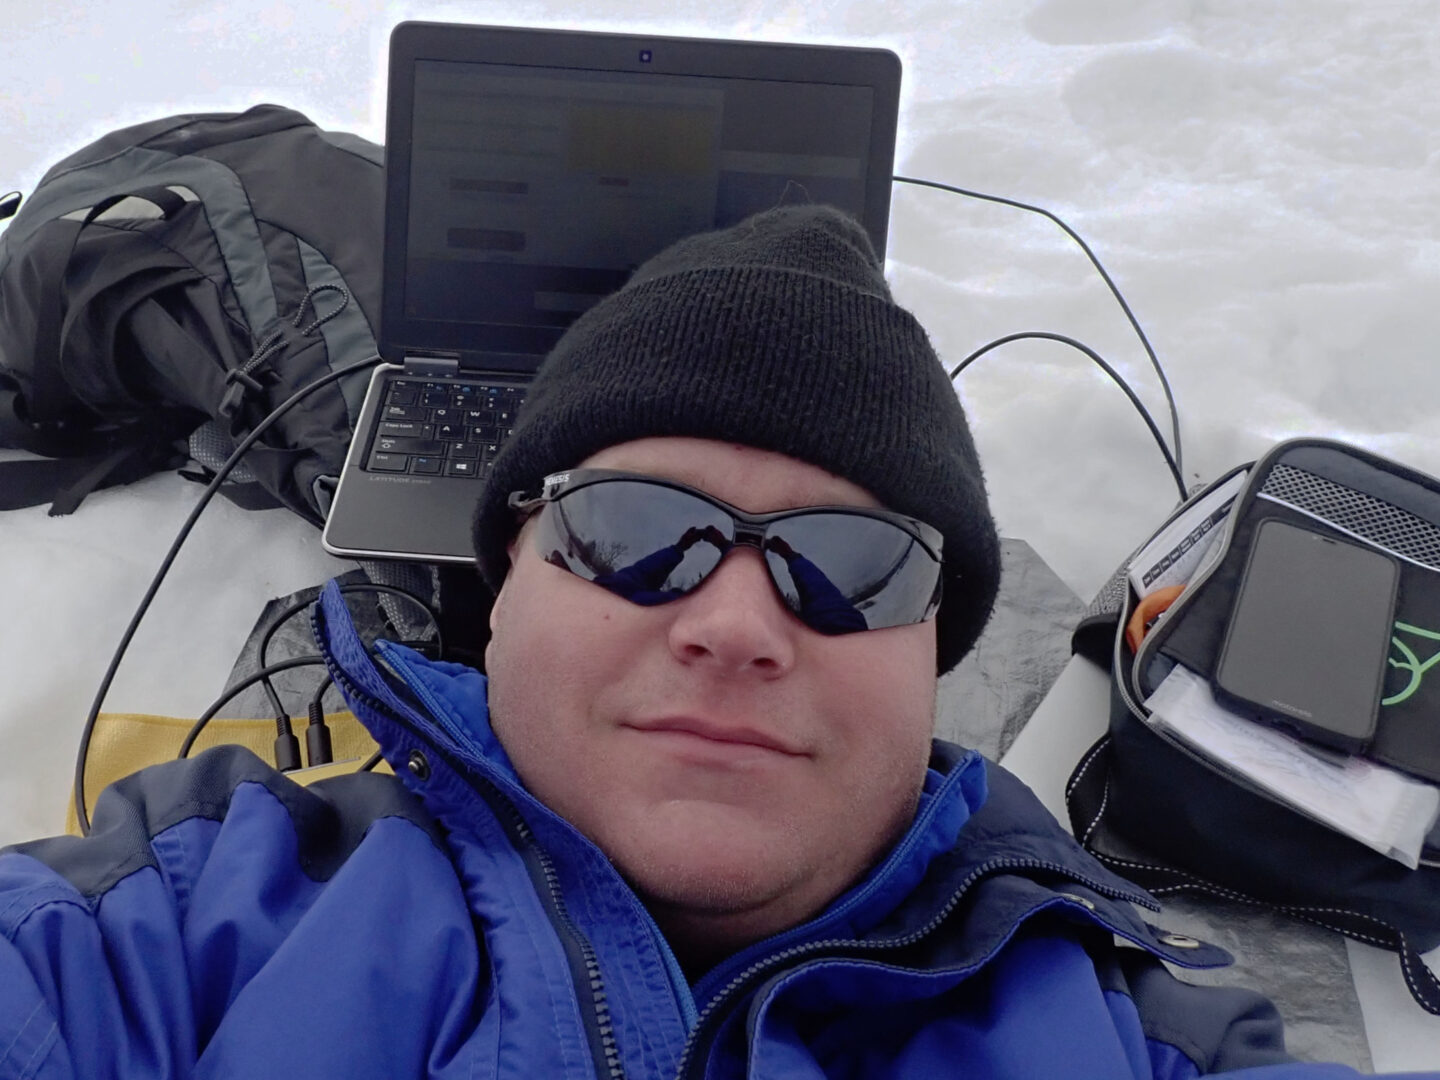 Operating FT8 with 5 watts in Alaska, in the snow